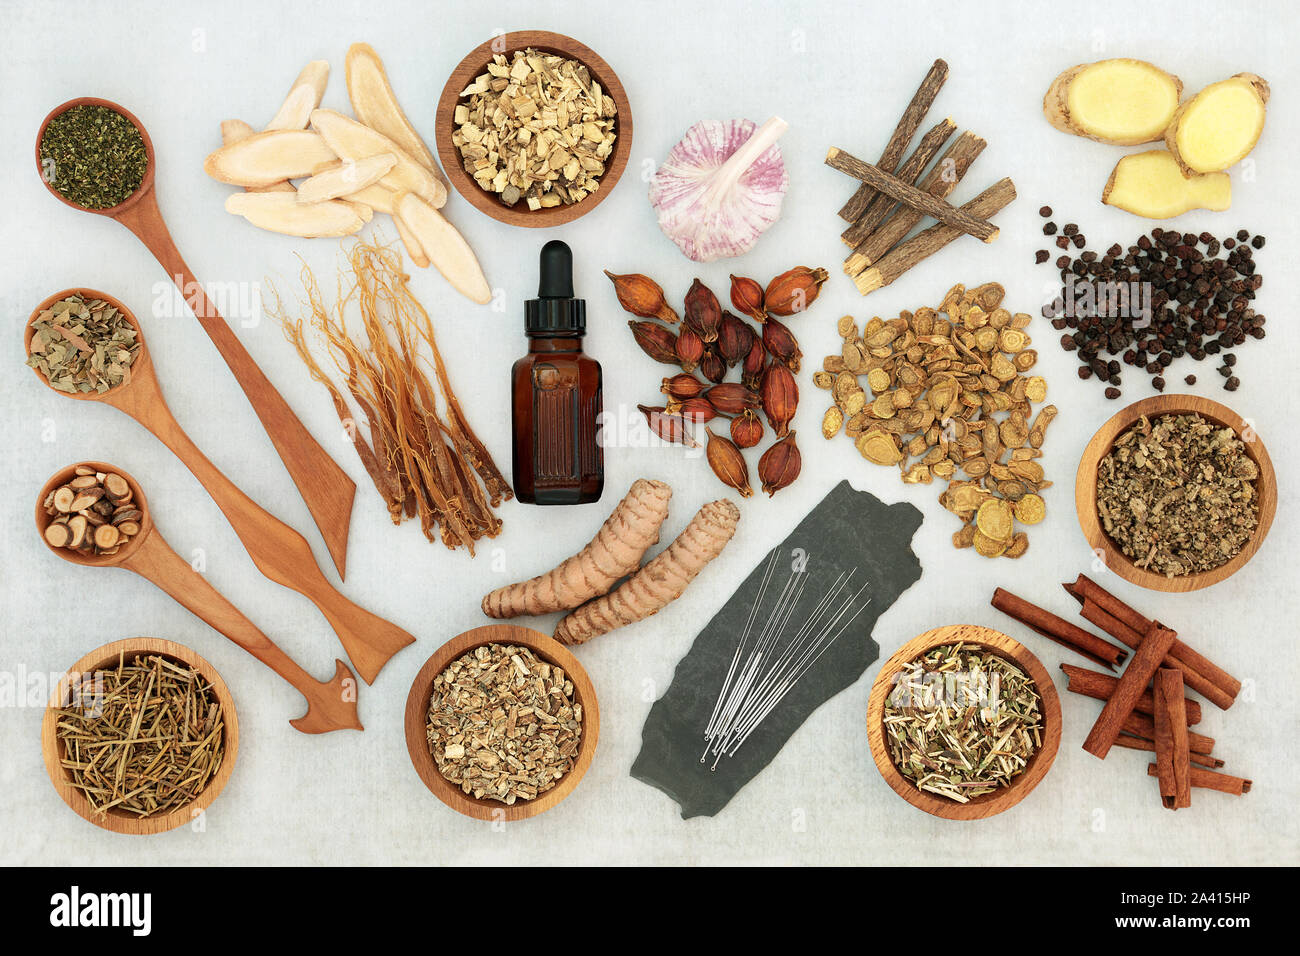 Alternative and chinese herbal medicine to treat asthma, COPD and respiratory diseases with herbs & spice selection and acupuncture needles. Flat lay. Stock Photo